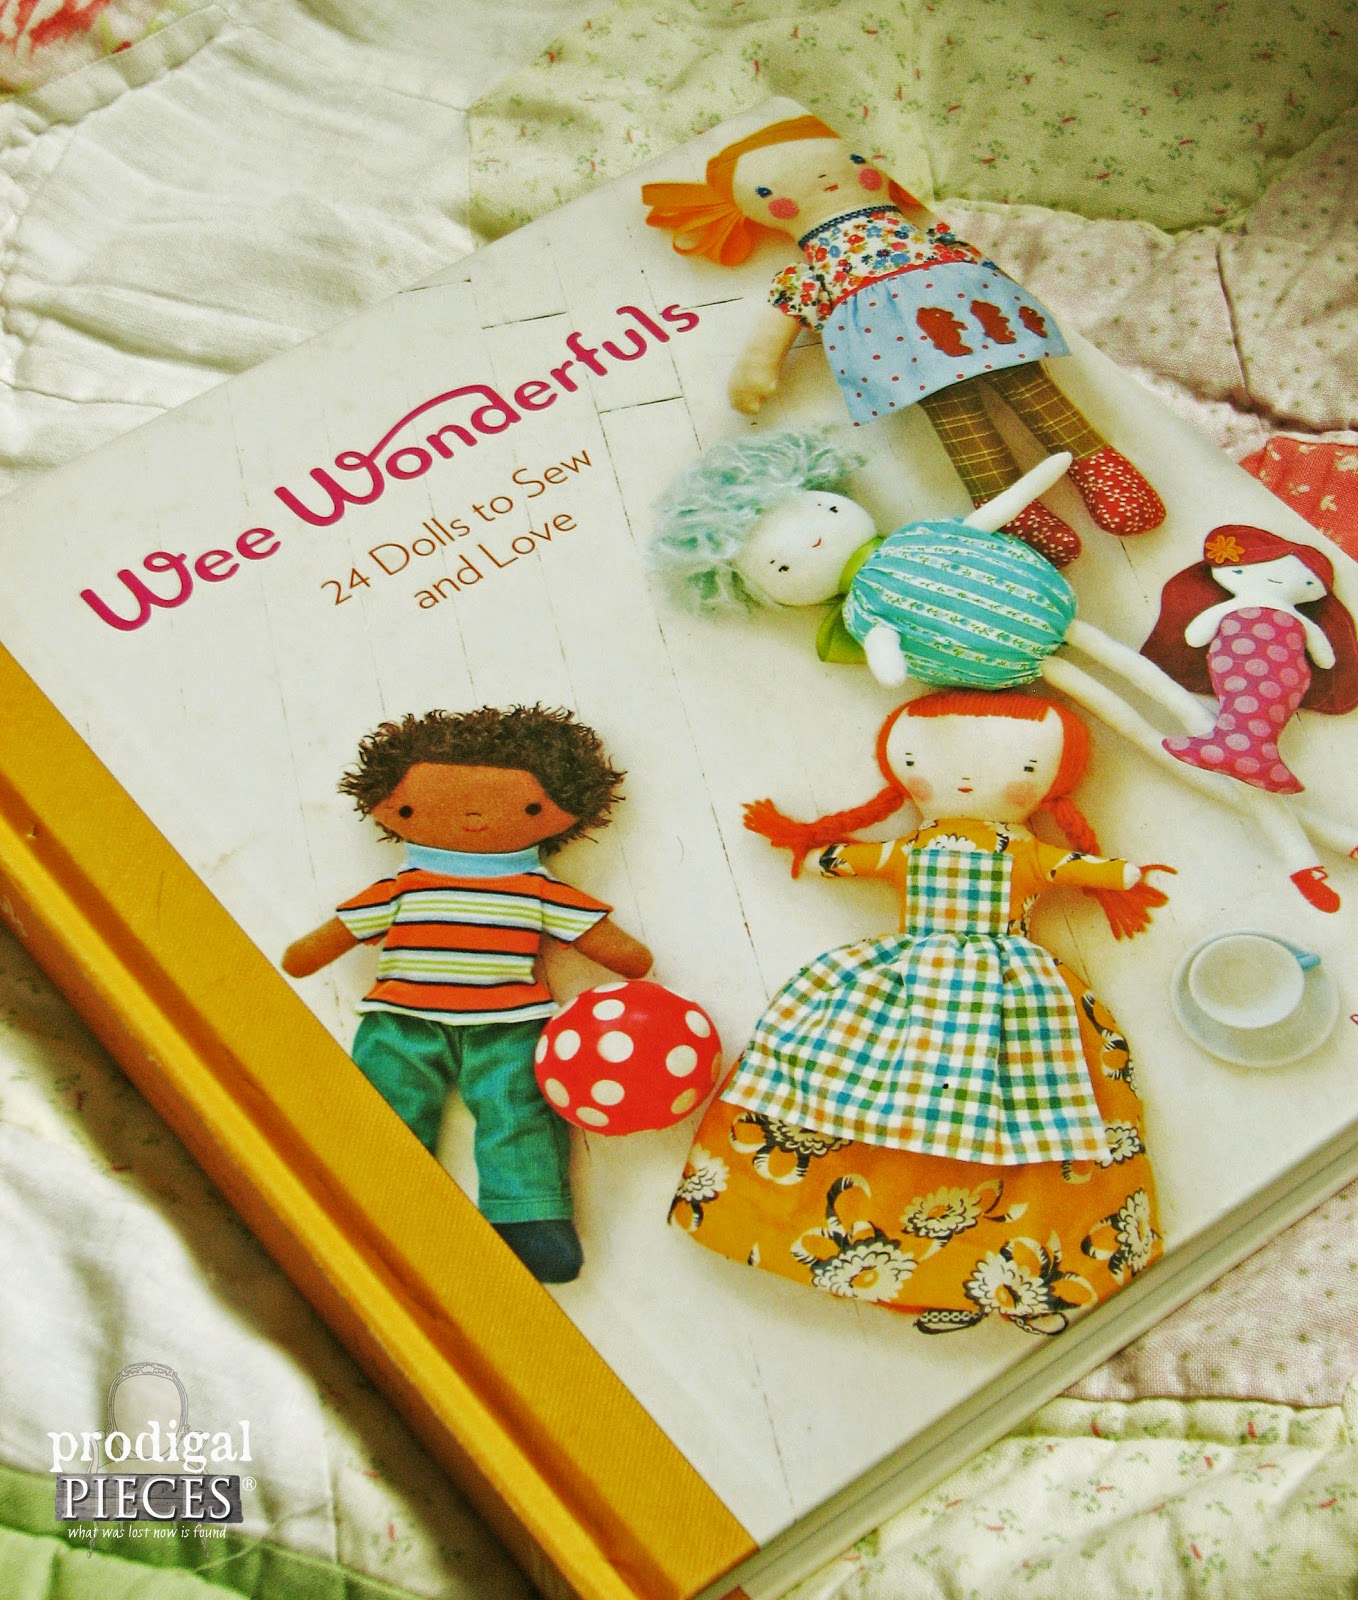 Wee Wonderful Handmade Doll Pattern in Book | prodigalpieces.com